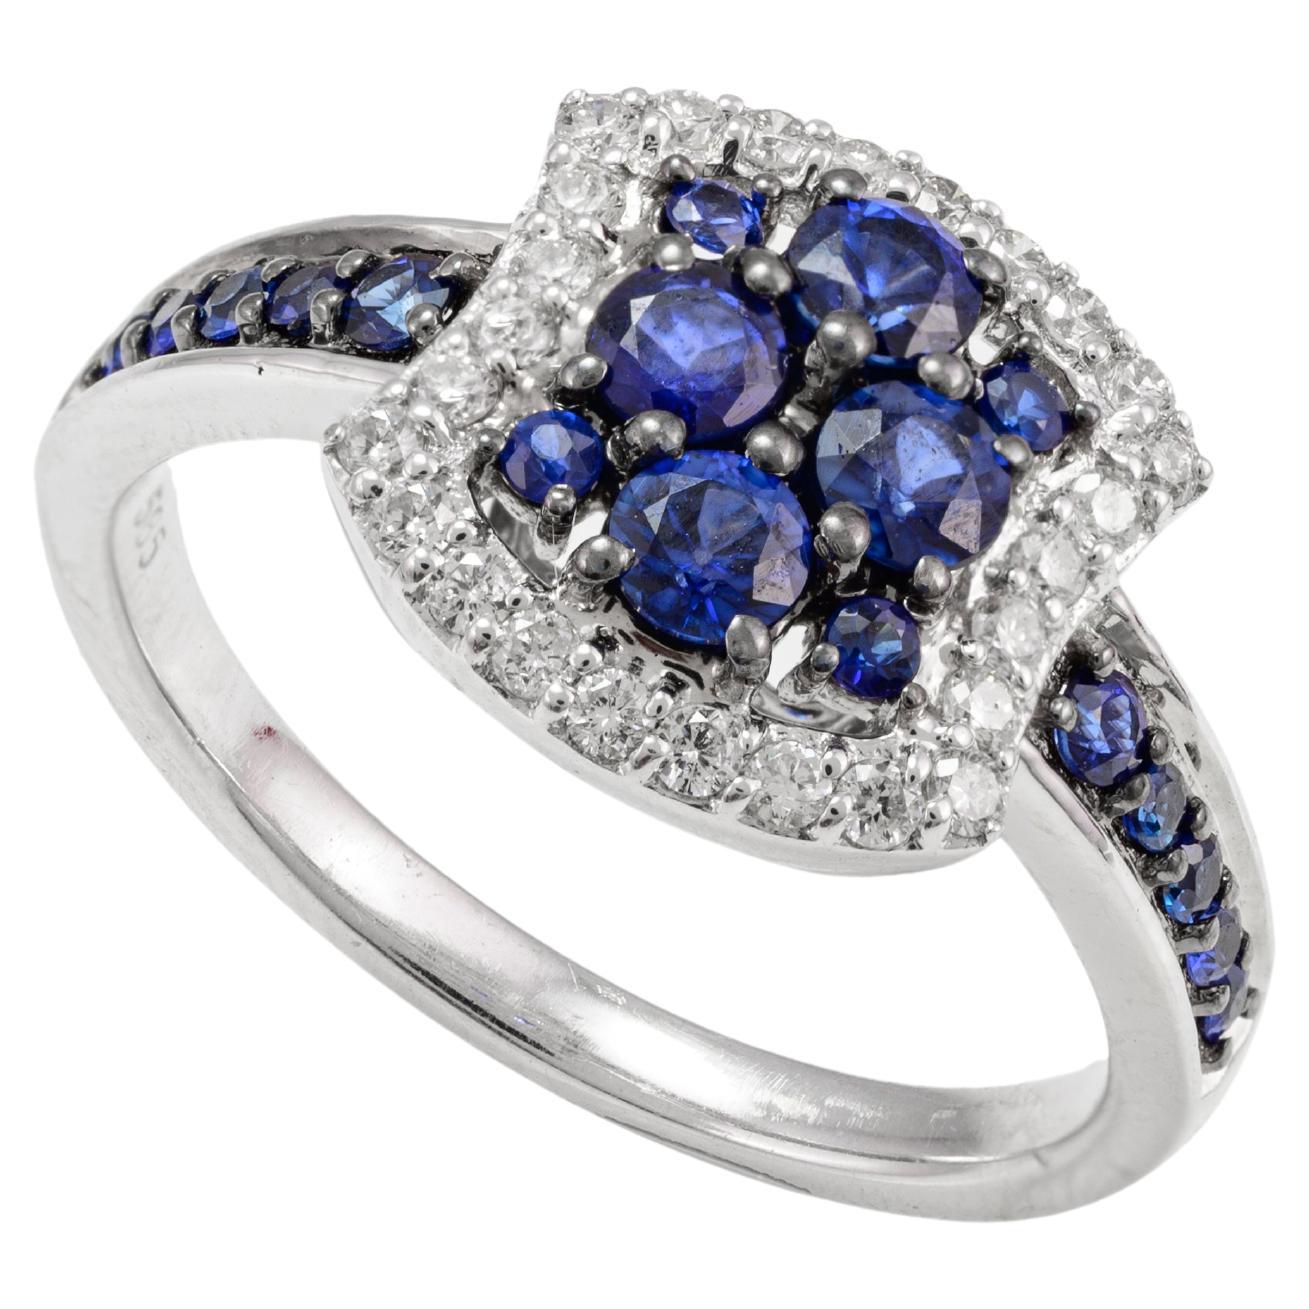 Antique Blue Sapphire and Diamond Engagement Ring in 14k Solid White Gold